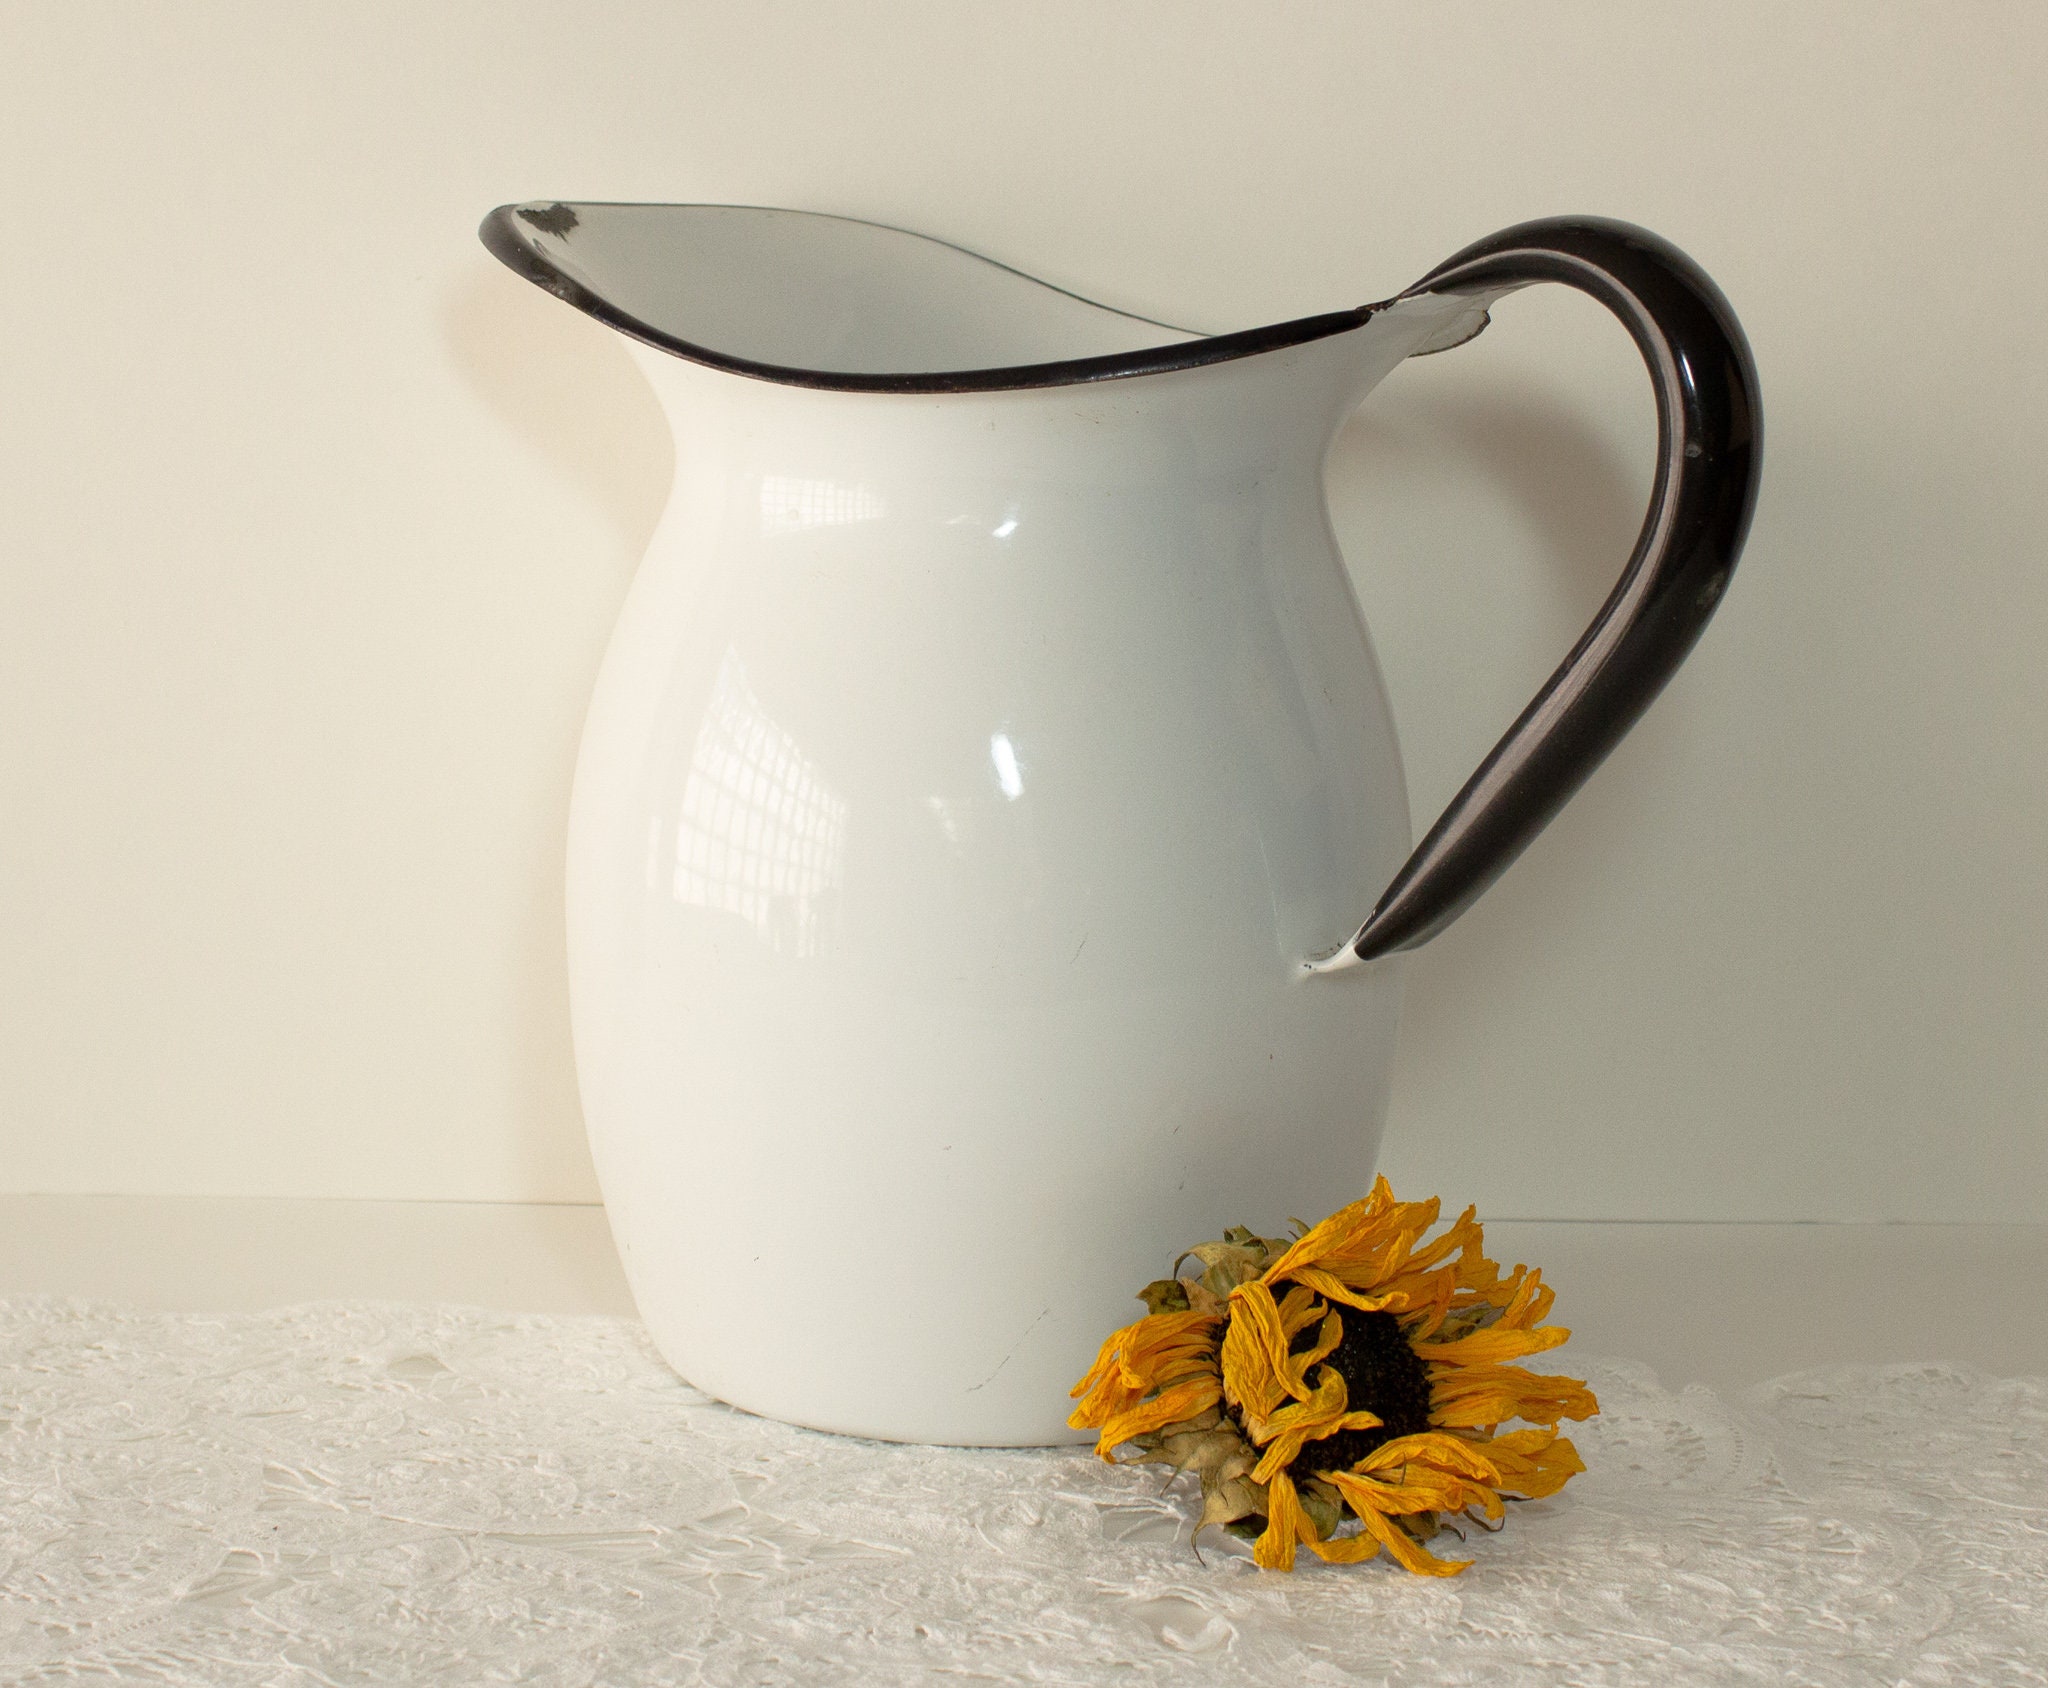 Vintage Handblown Glass Water Pitcher with White Flowers circa 1970s-1980s